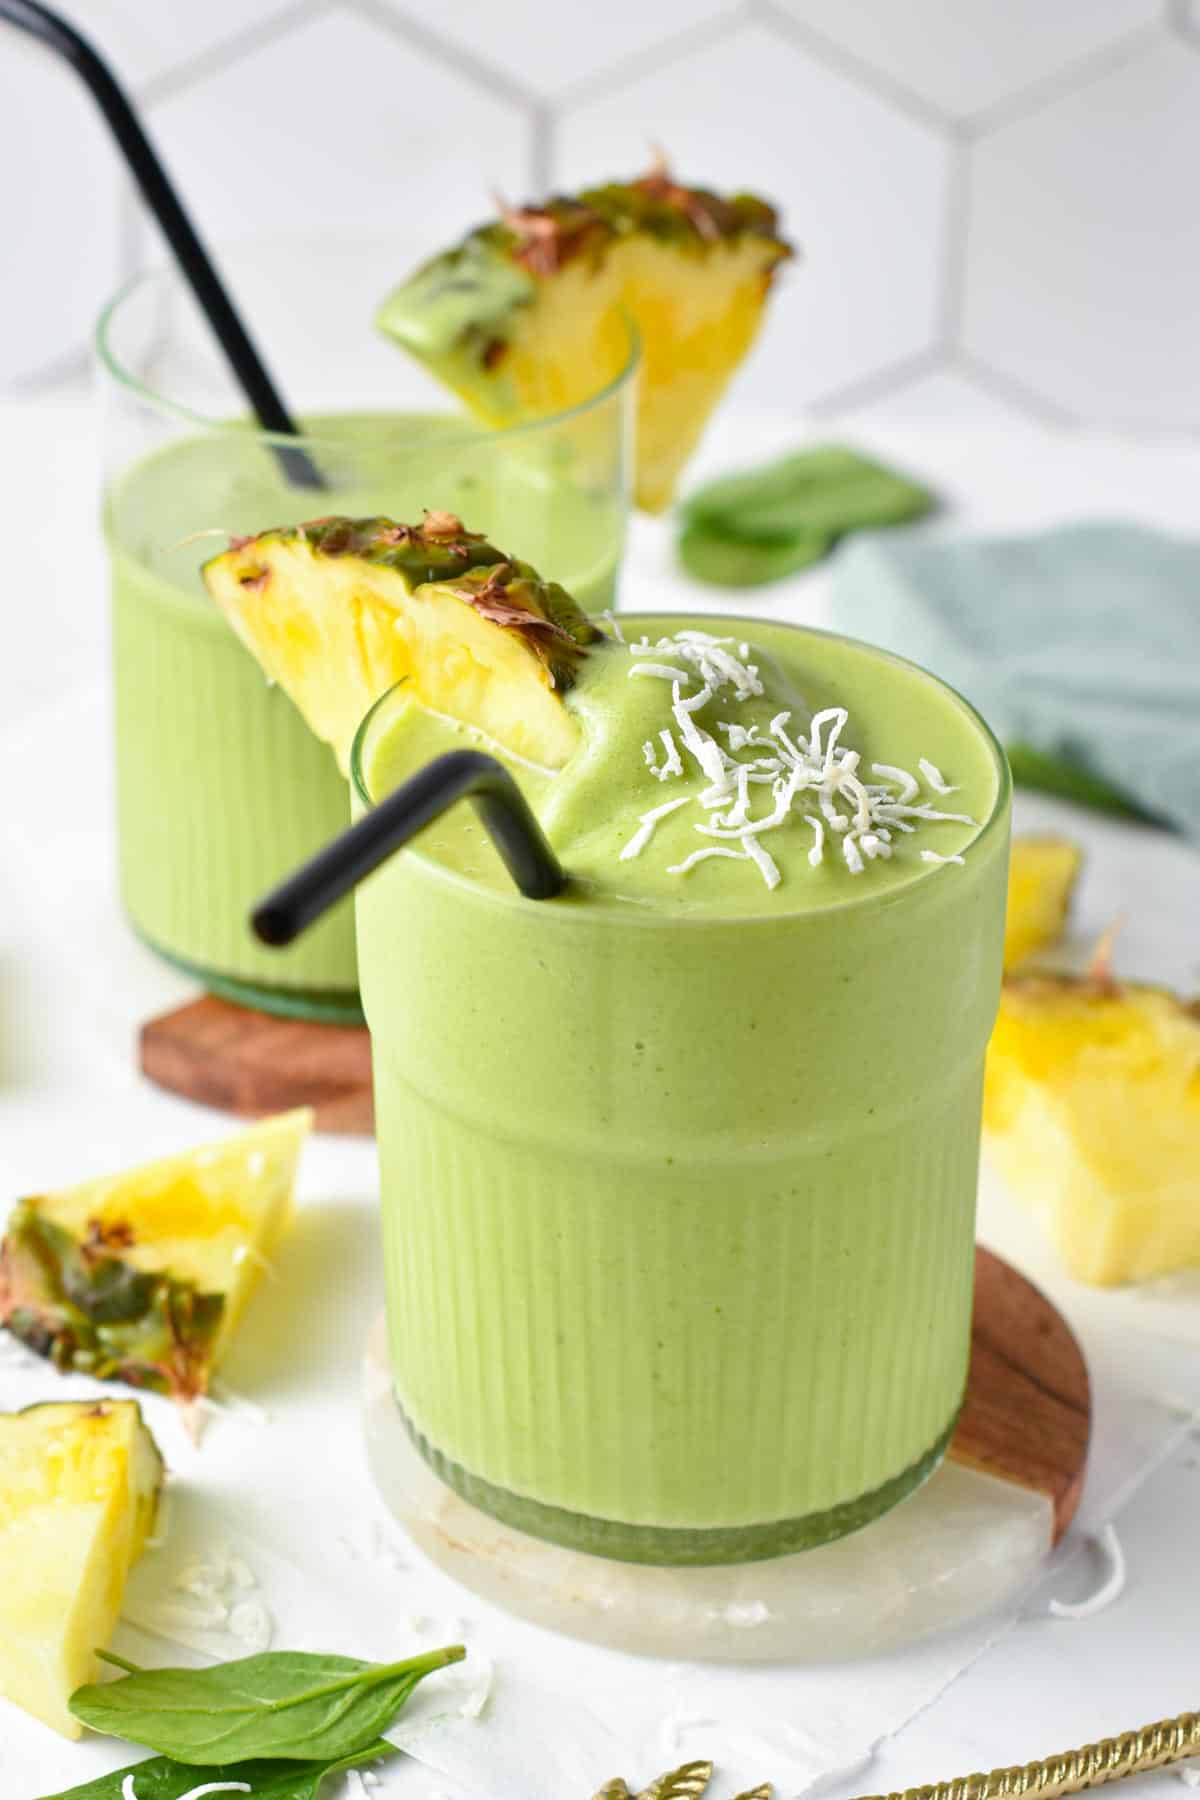 This Spinach Pineapple Banana Smoothie is a delicious easy green smoothie packed with tropical flavors and nutrients from spinach.This Spinach Pineapple Banana Smoothie is a delicious easy green smoothie packed with tropical flavors and nutrients from spinach.